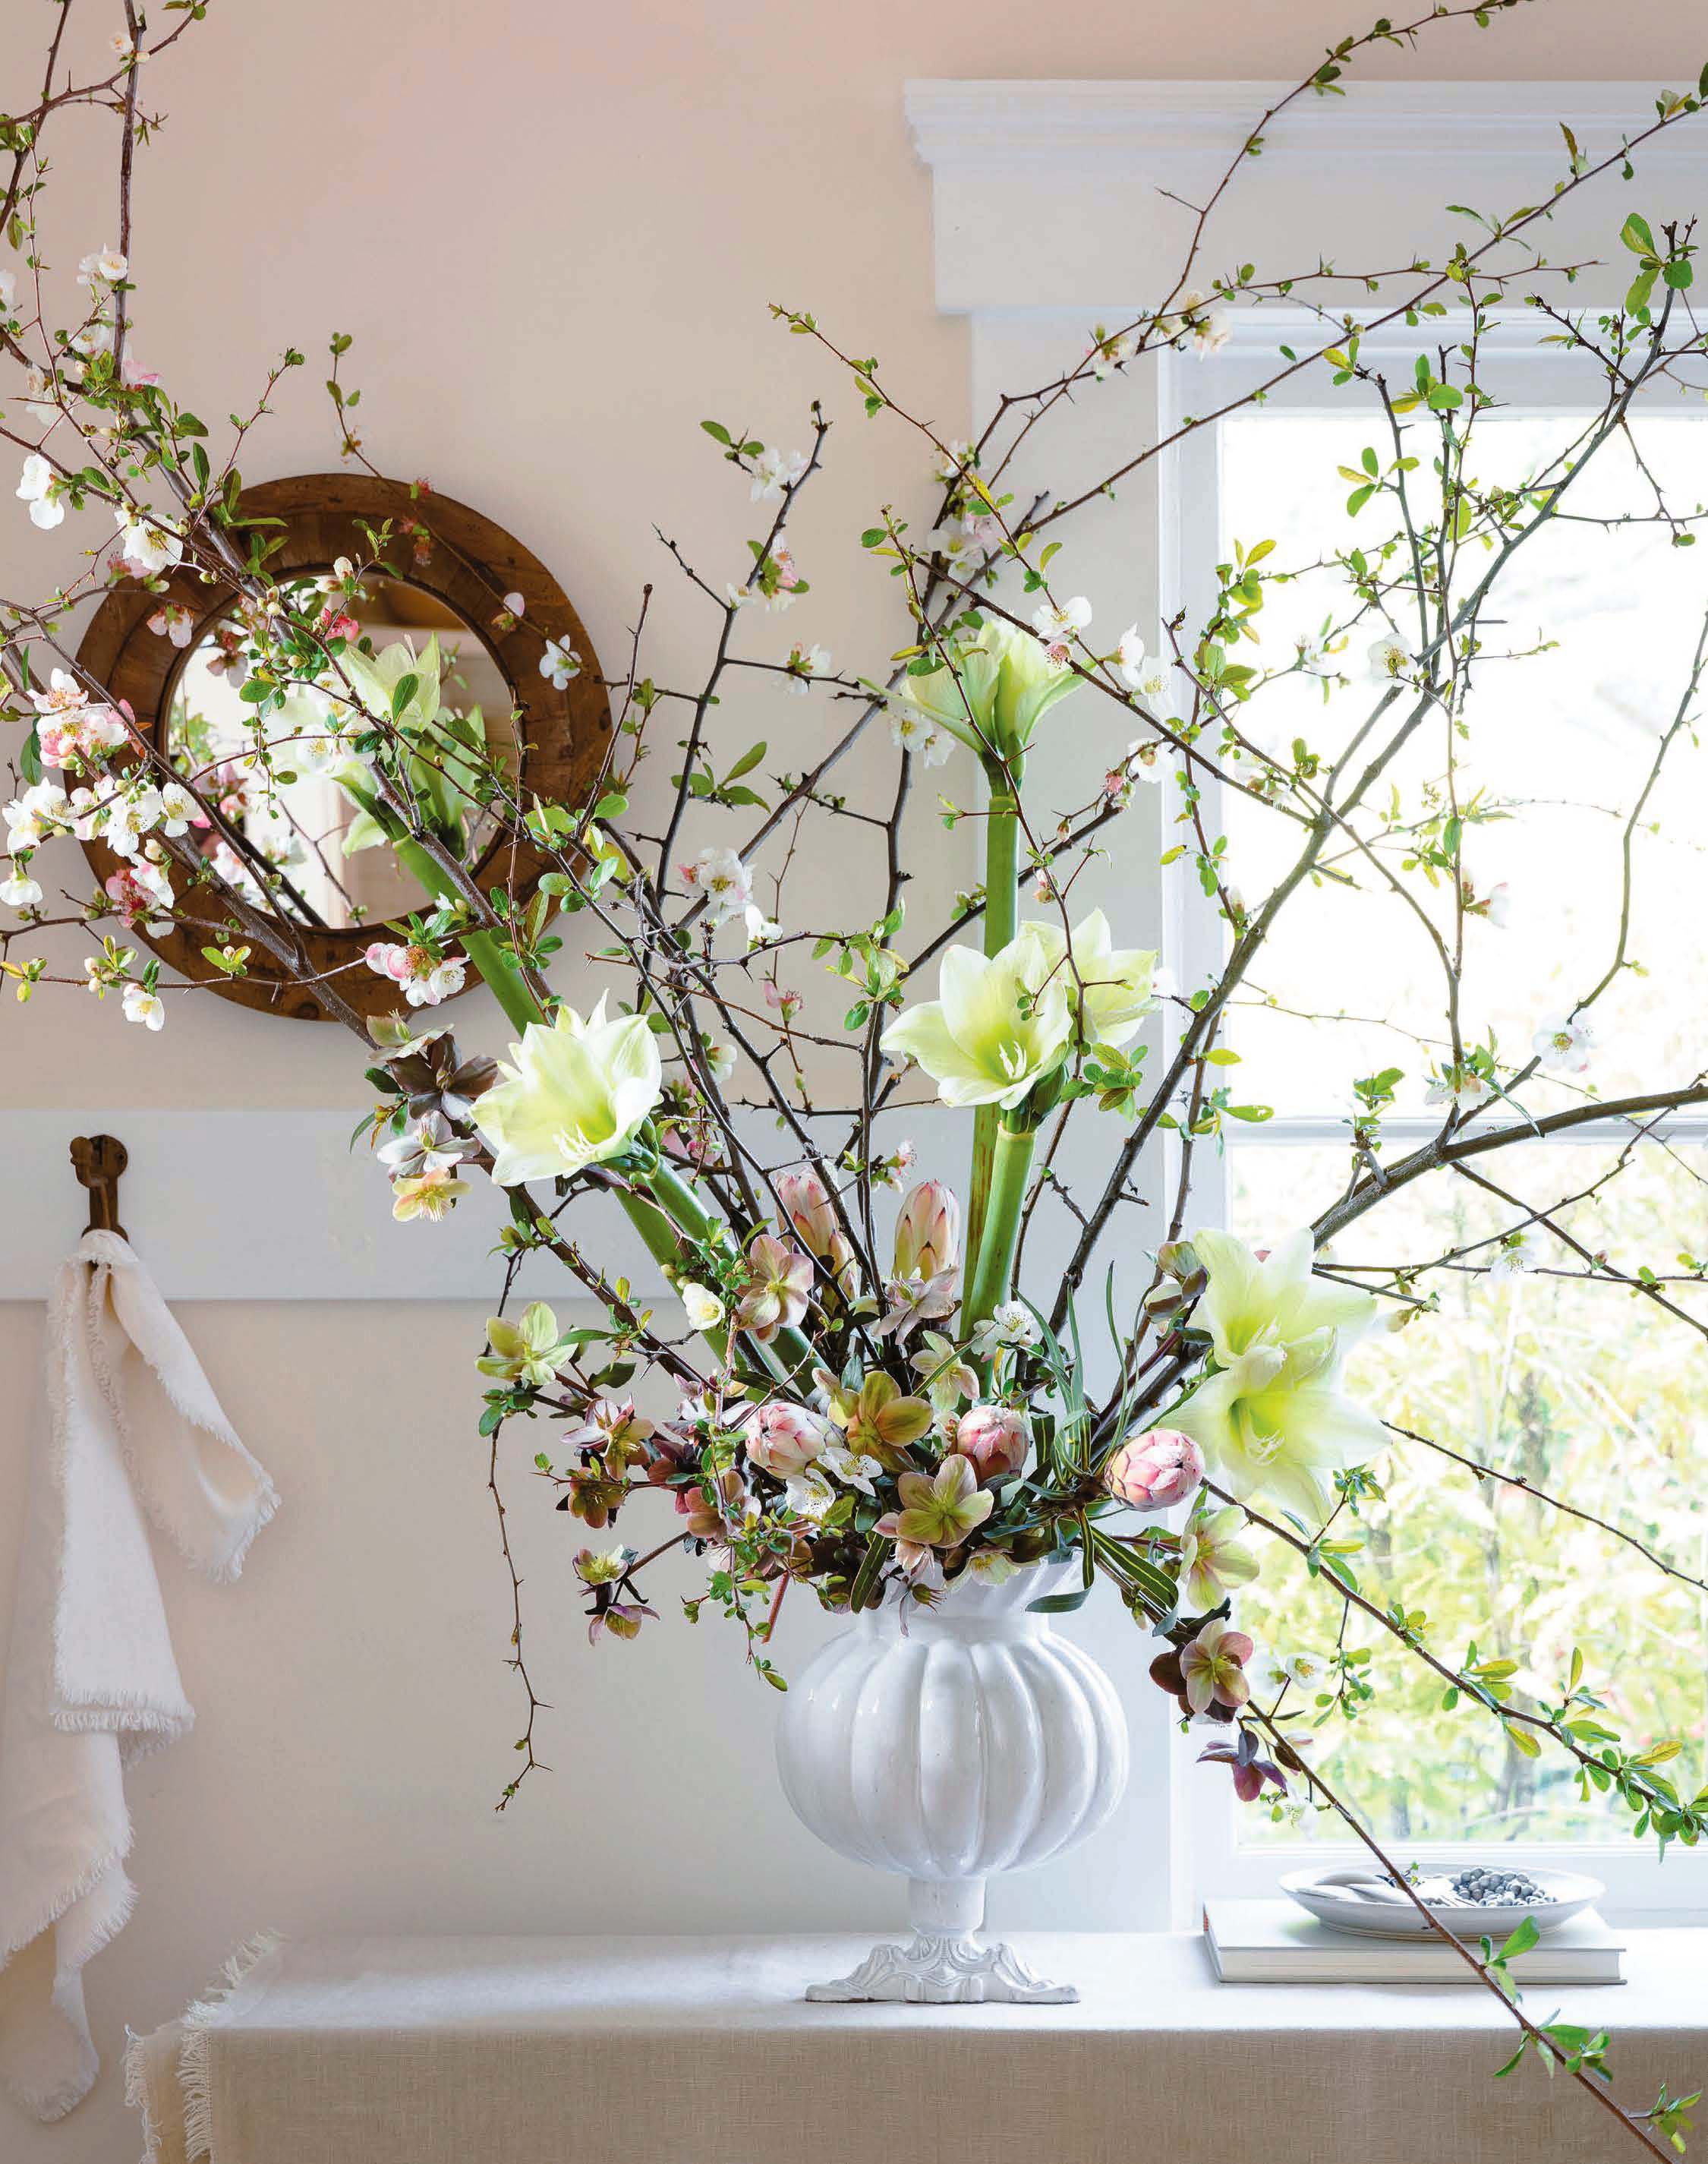 A Winter Floral Arrangement That Feels Like Spring